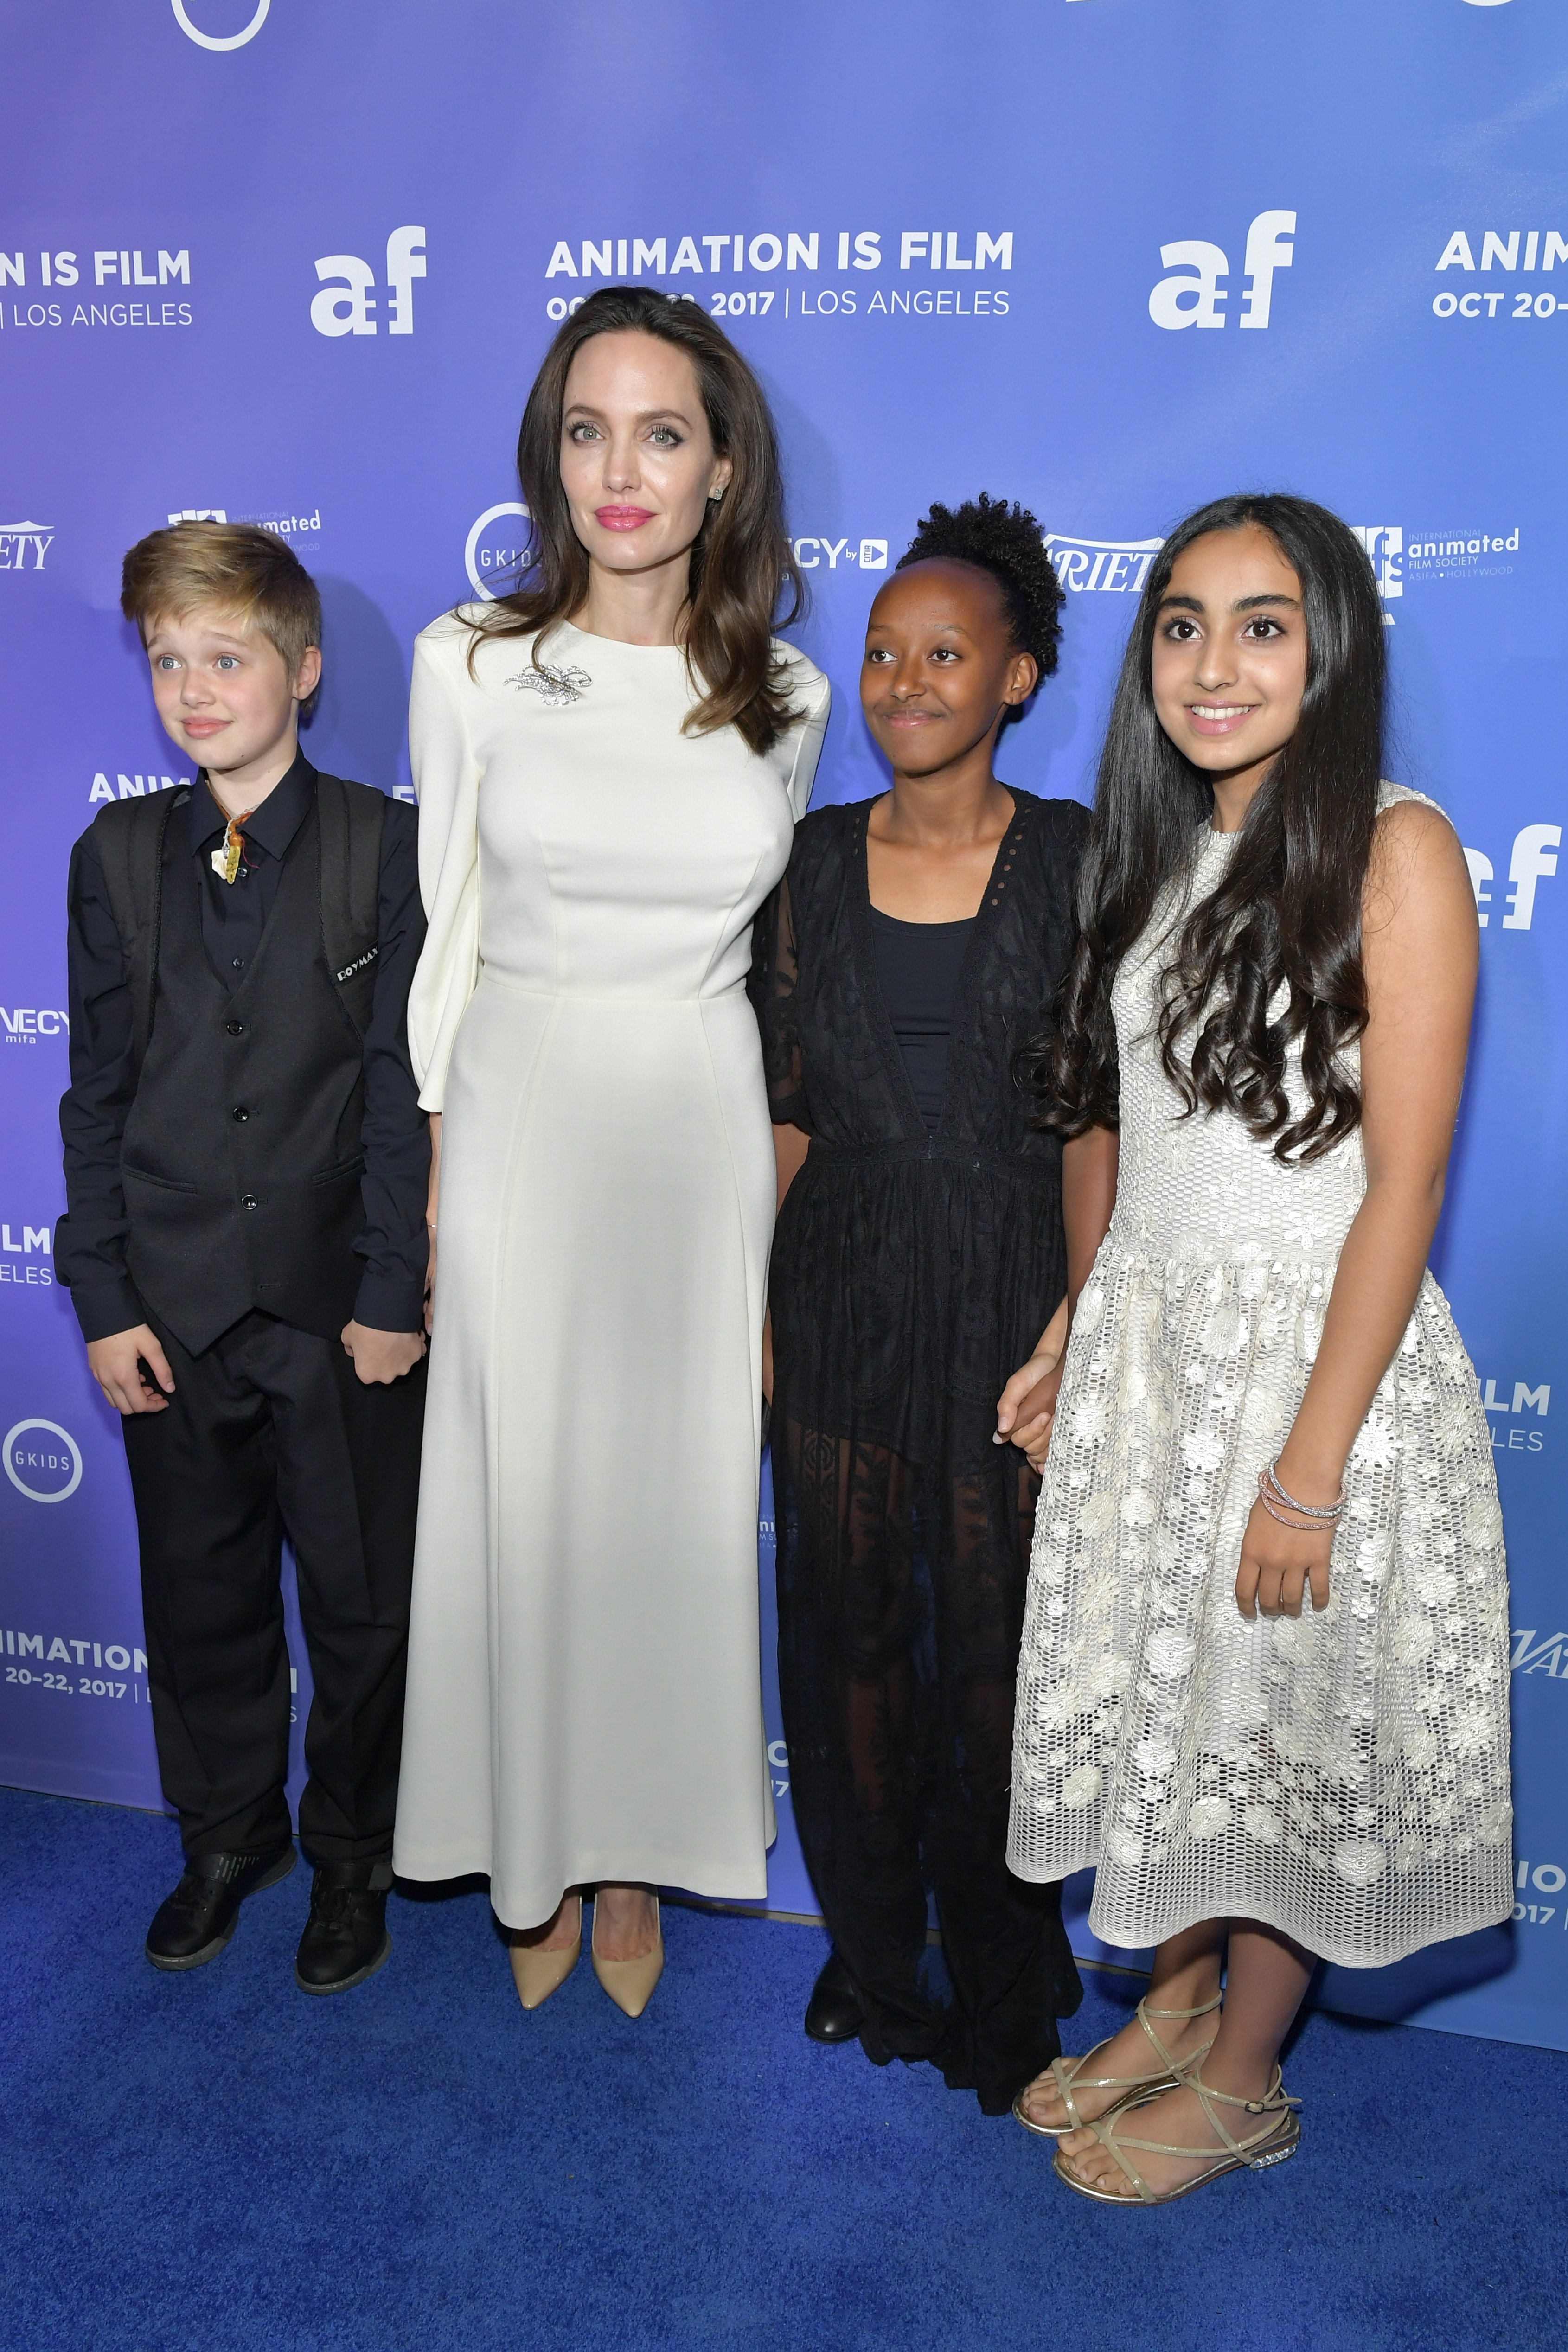 Shiloh Jolie-Pitt, Angelina Jolie, Zahara Jolie-Pitt and Saara Chaudry attend the premiere of Gkids' 'The Breadwinner' at TCL Chinese 6 Theatres on October 20, 2017 in Hollywood, California.| Source: Getty Images